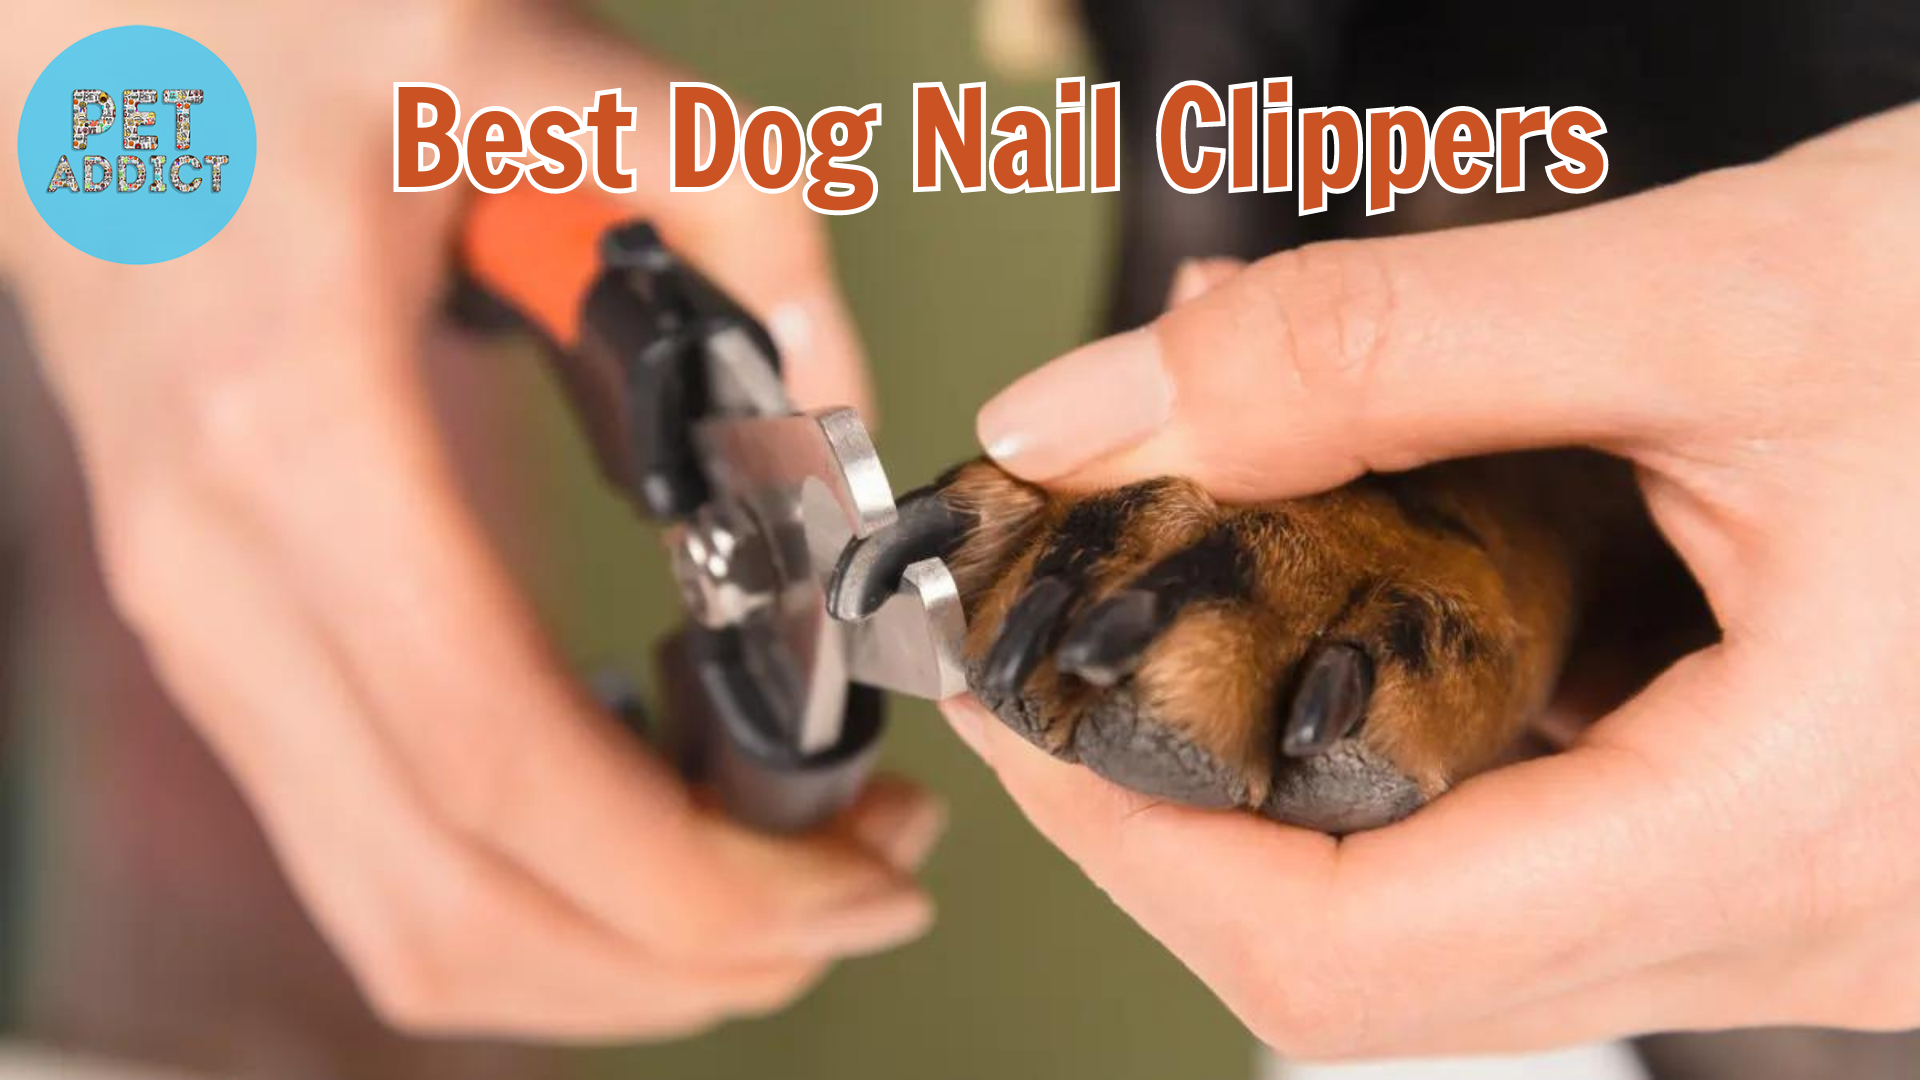 5 Best Dog Nail Clippers: Keeping Your Dog’s Nails Neat and Trim